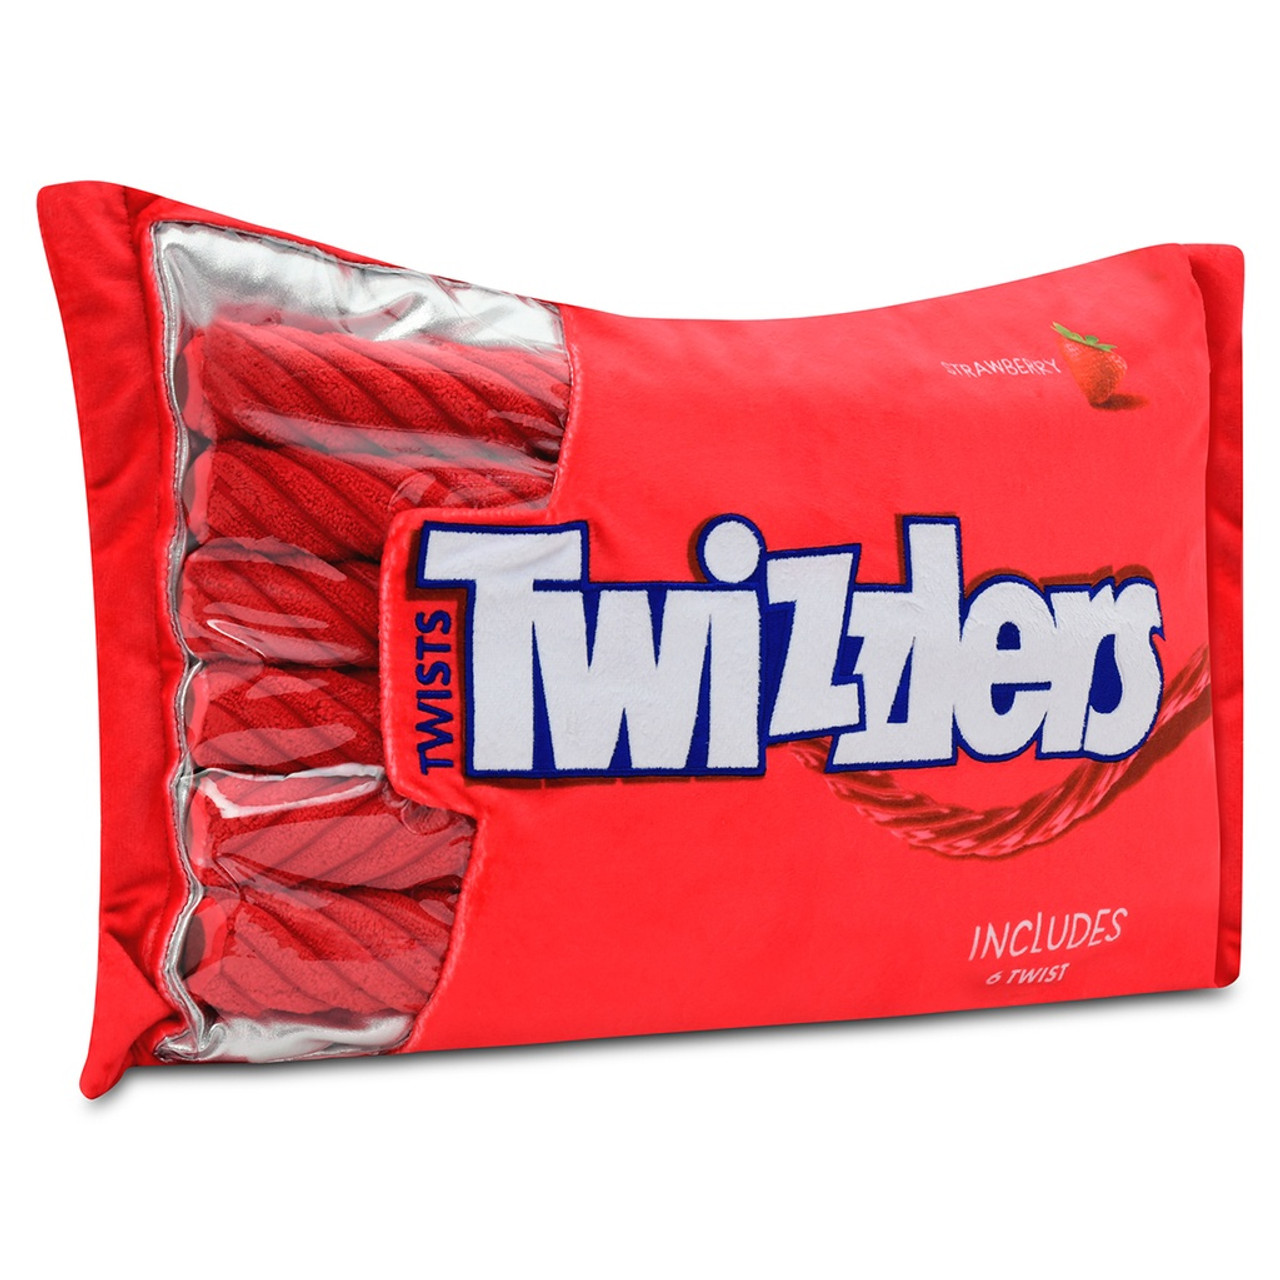 Twizzlers Package Plush